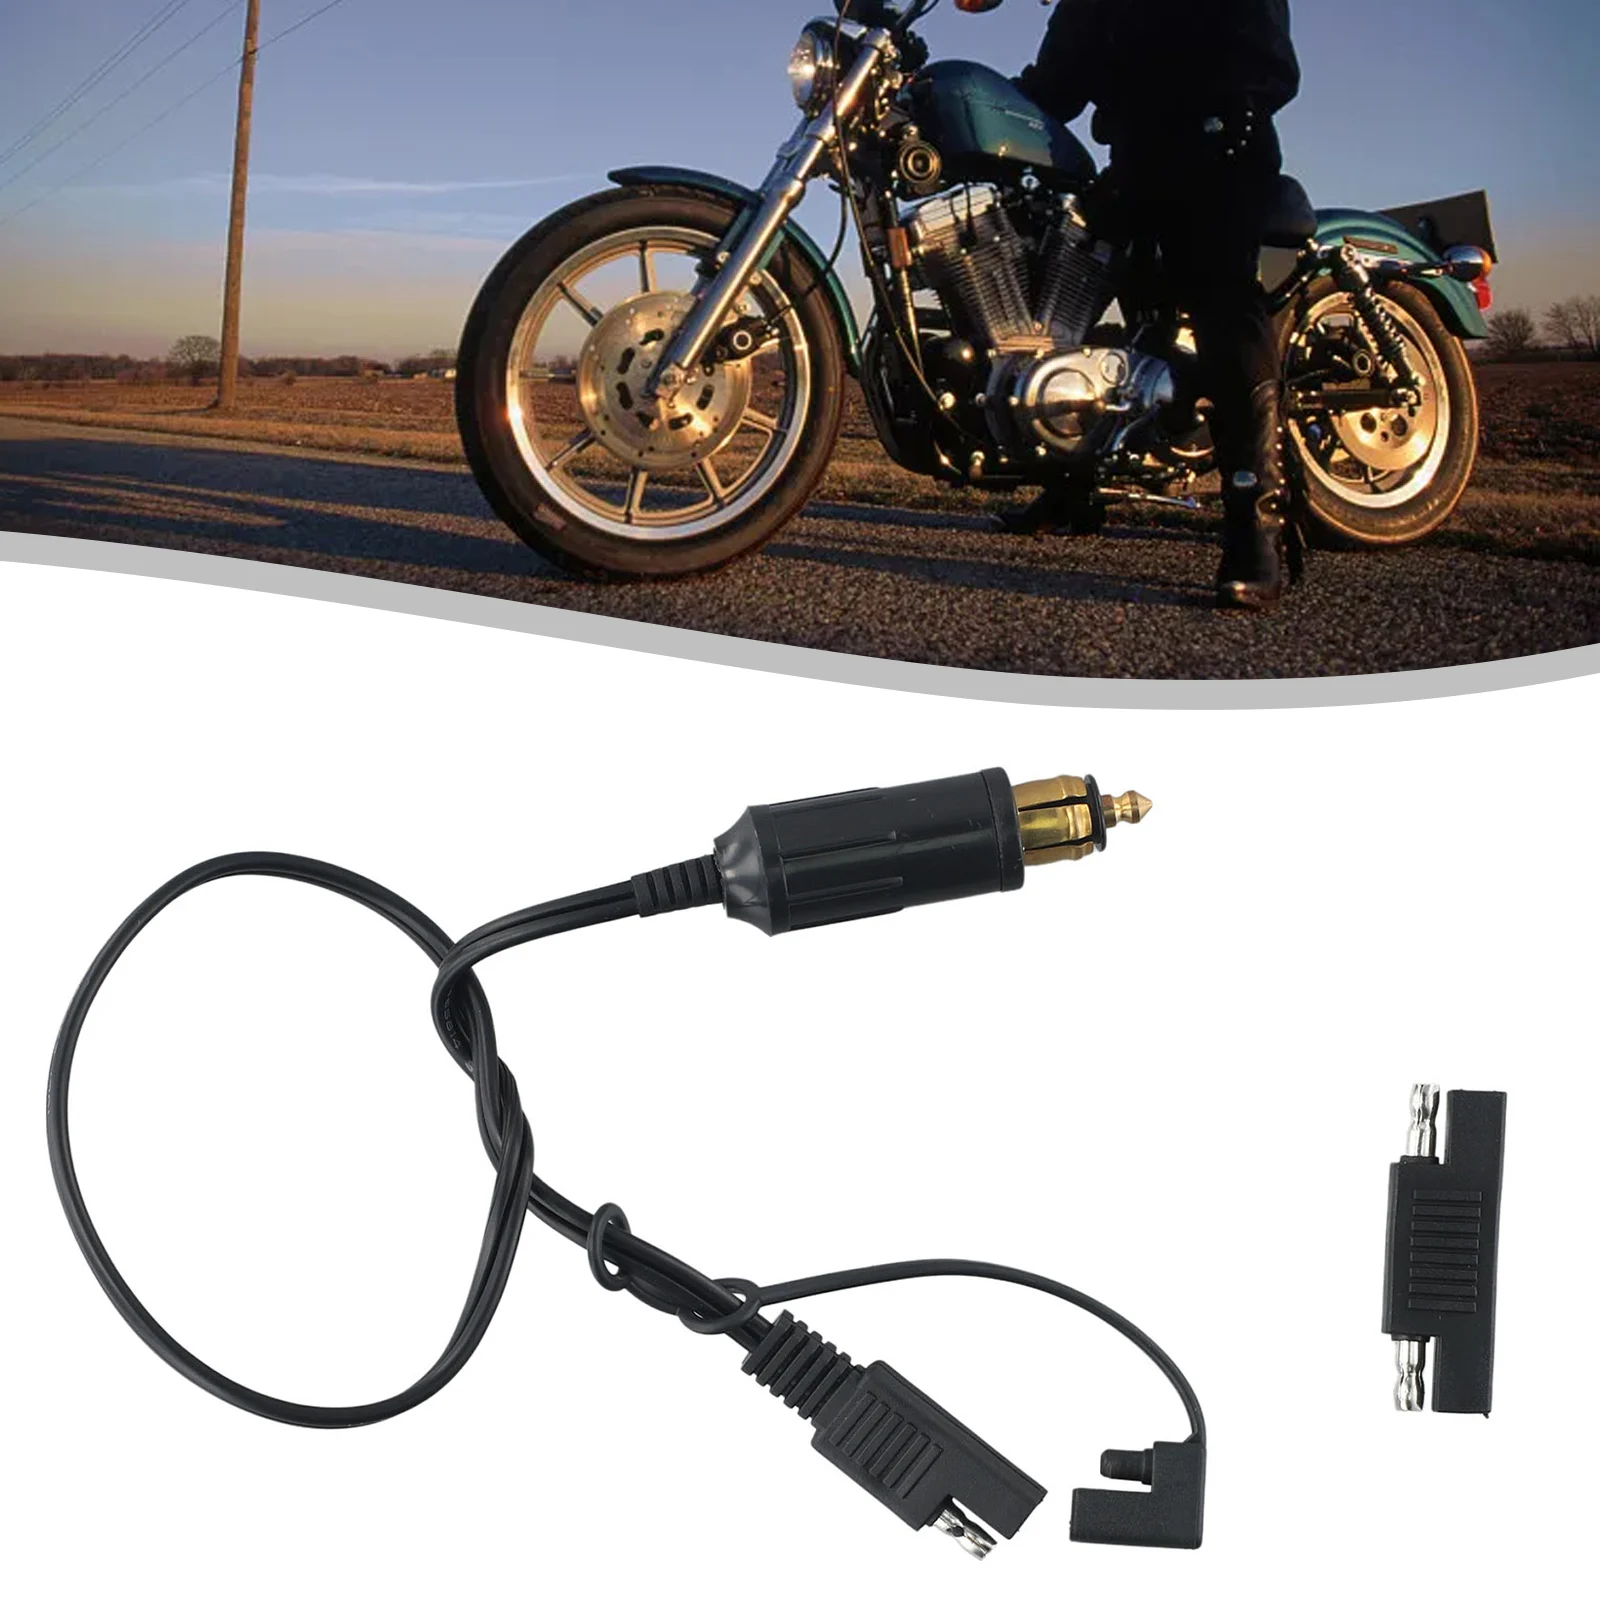 For BMW Motorcycle Connection Cable Battery Charger SAE Plug A 3 For Device Charging, Heating, Battery Management